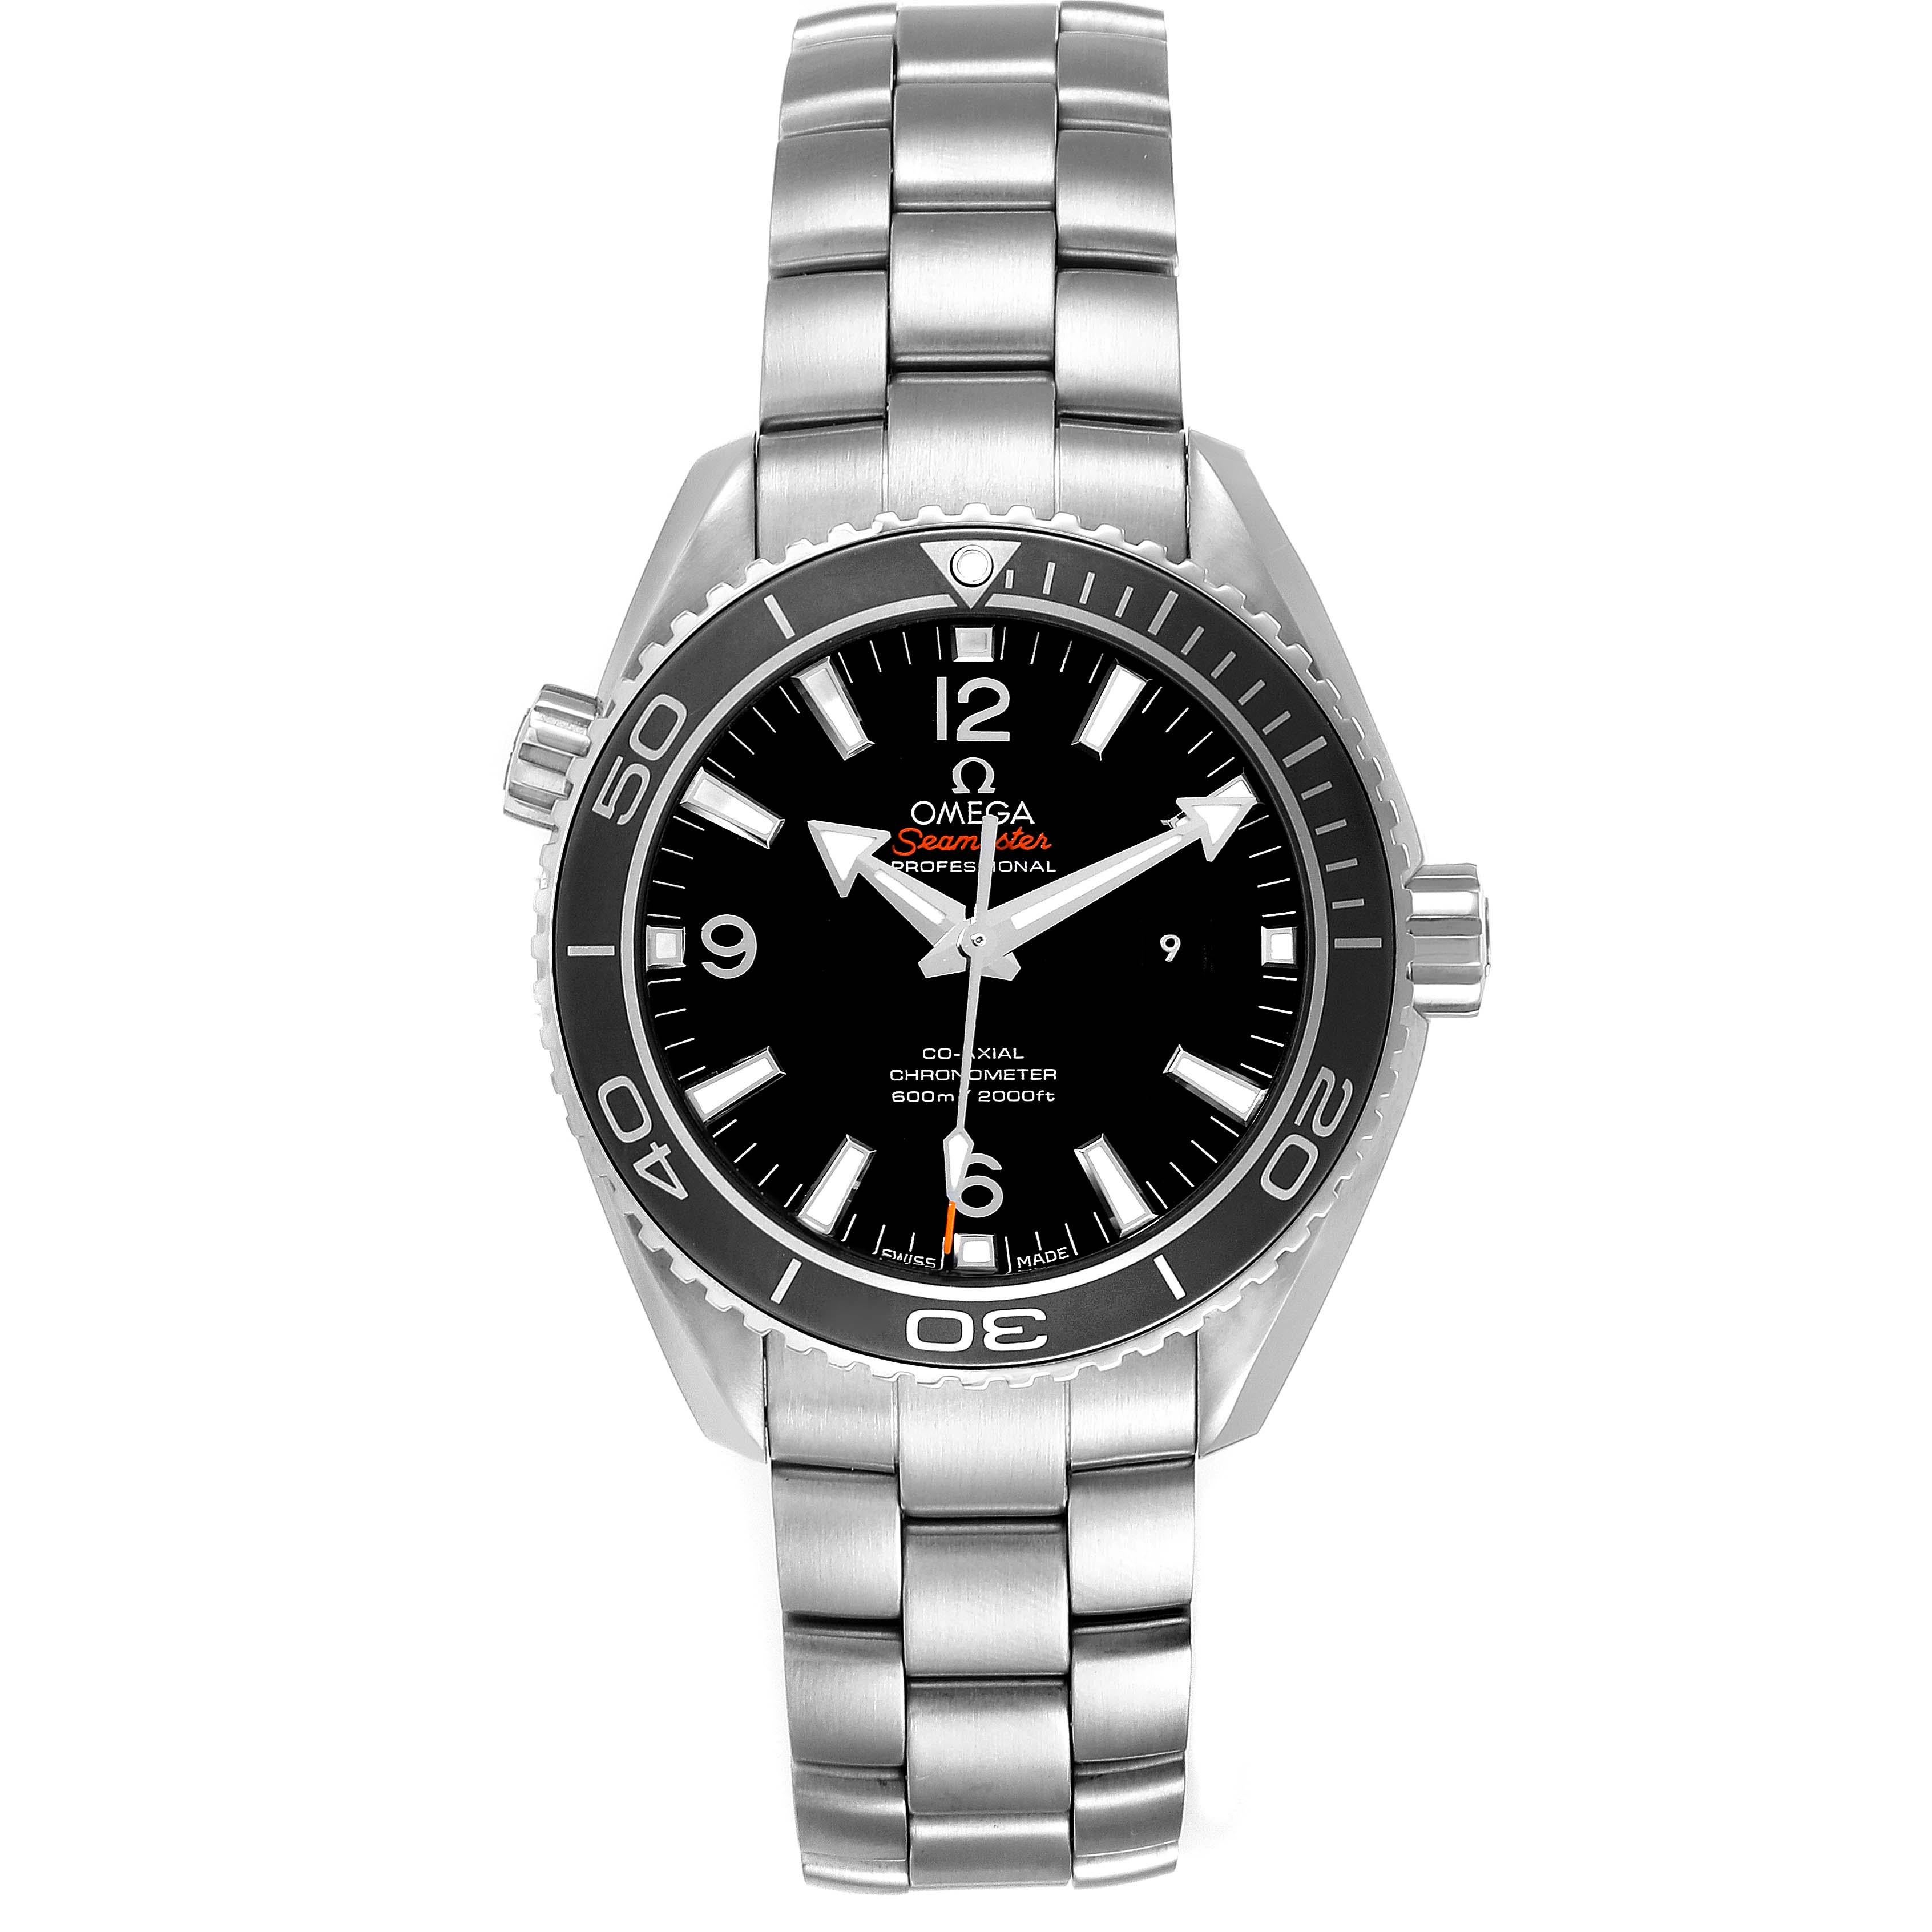 Omega Seamaster Planet Ocean 600m Steel Mens Watch 232.30.38.20.01.001 Box Card. Automatic self-winding chronometer movement with Co-Axial Escapement for greater precision, stability, and durability. Free sprung-balance, 2 barrels mounted in series,